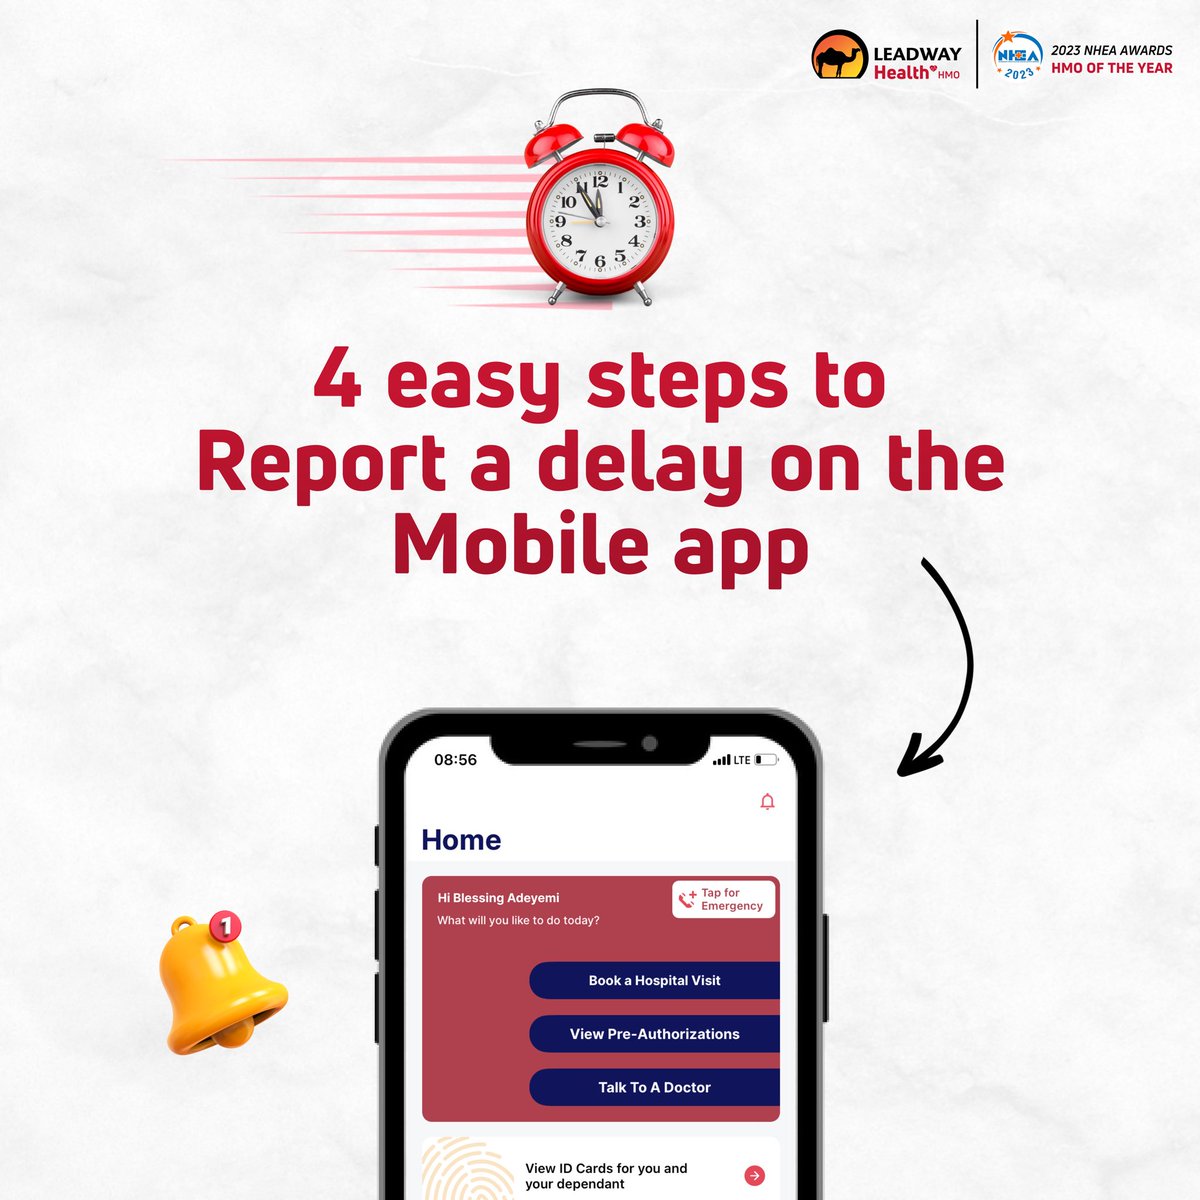 Reporting delays made easy!😎

Follow these 4 simple steps to report any delays on our mobile app and ensure prompt assistance. 

Swipe left for the guide and get started today! 

 #LeadwayHealth #nodelays #mobileapp #customerservice #promptassistance